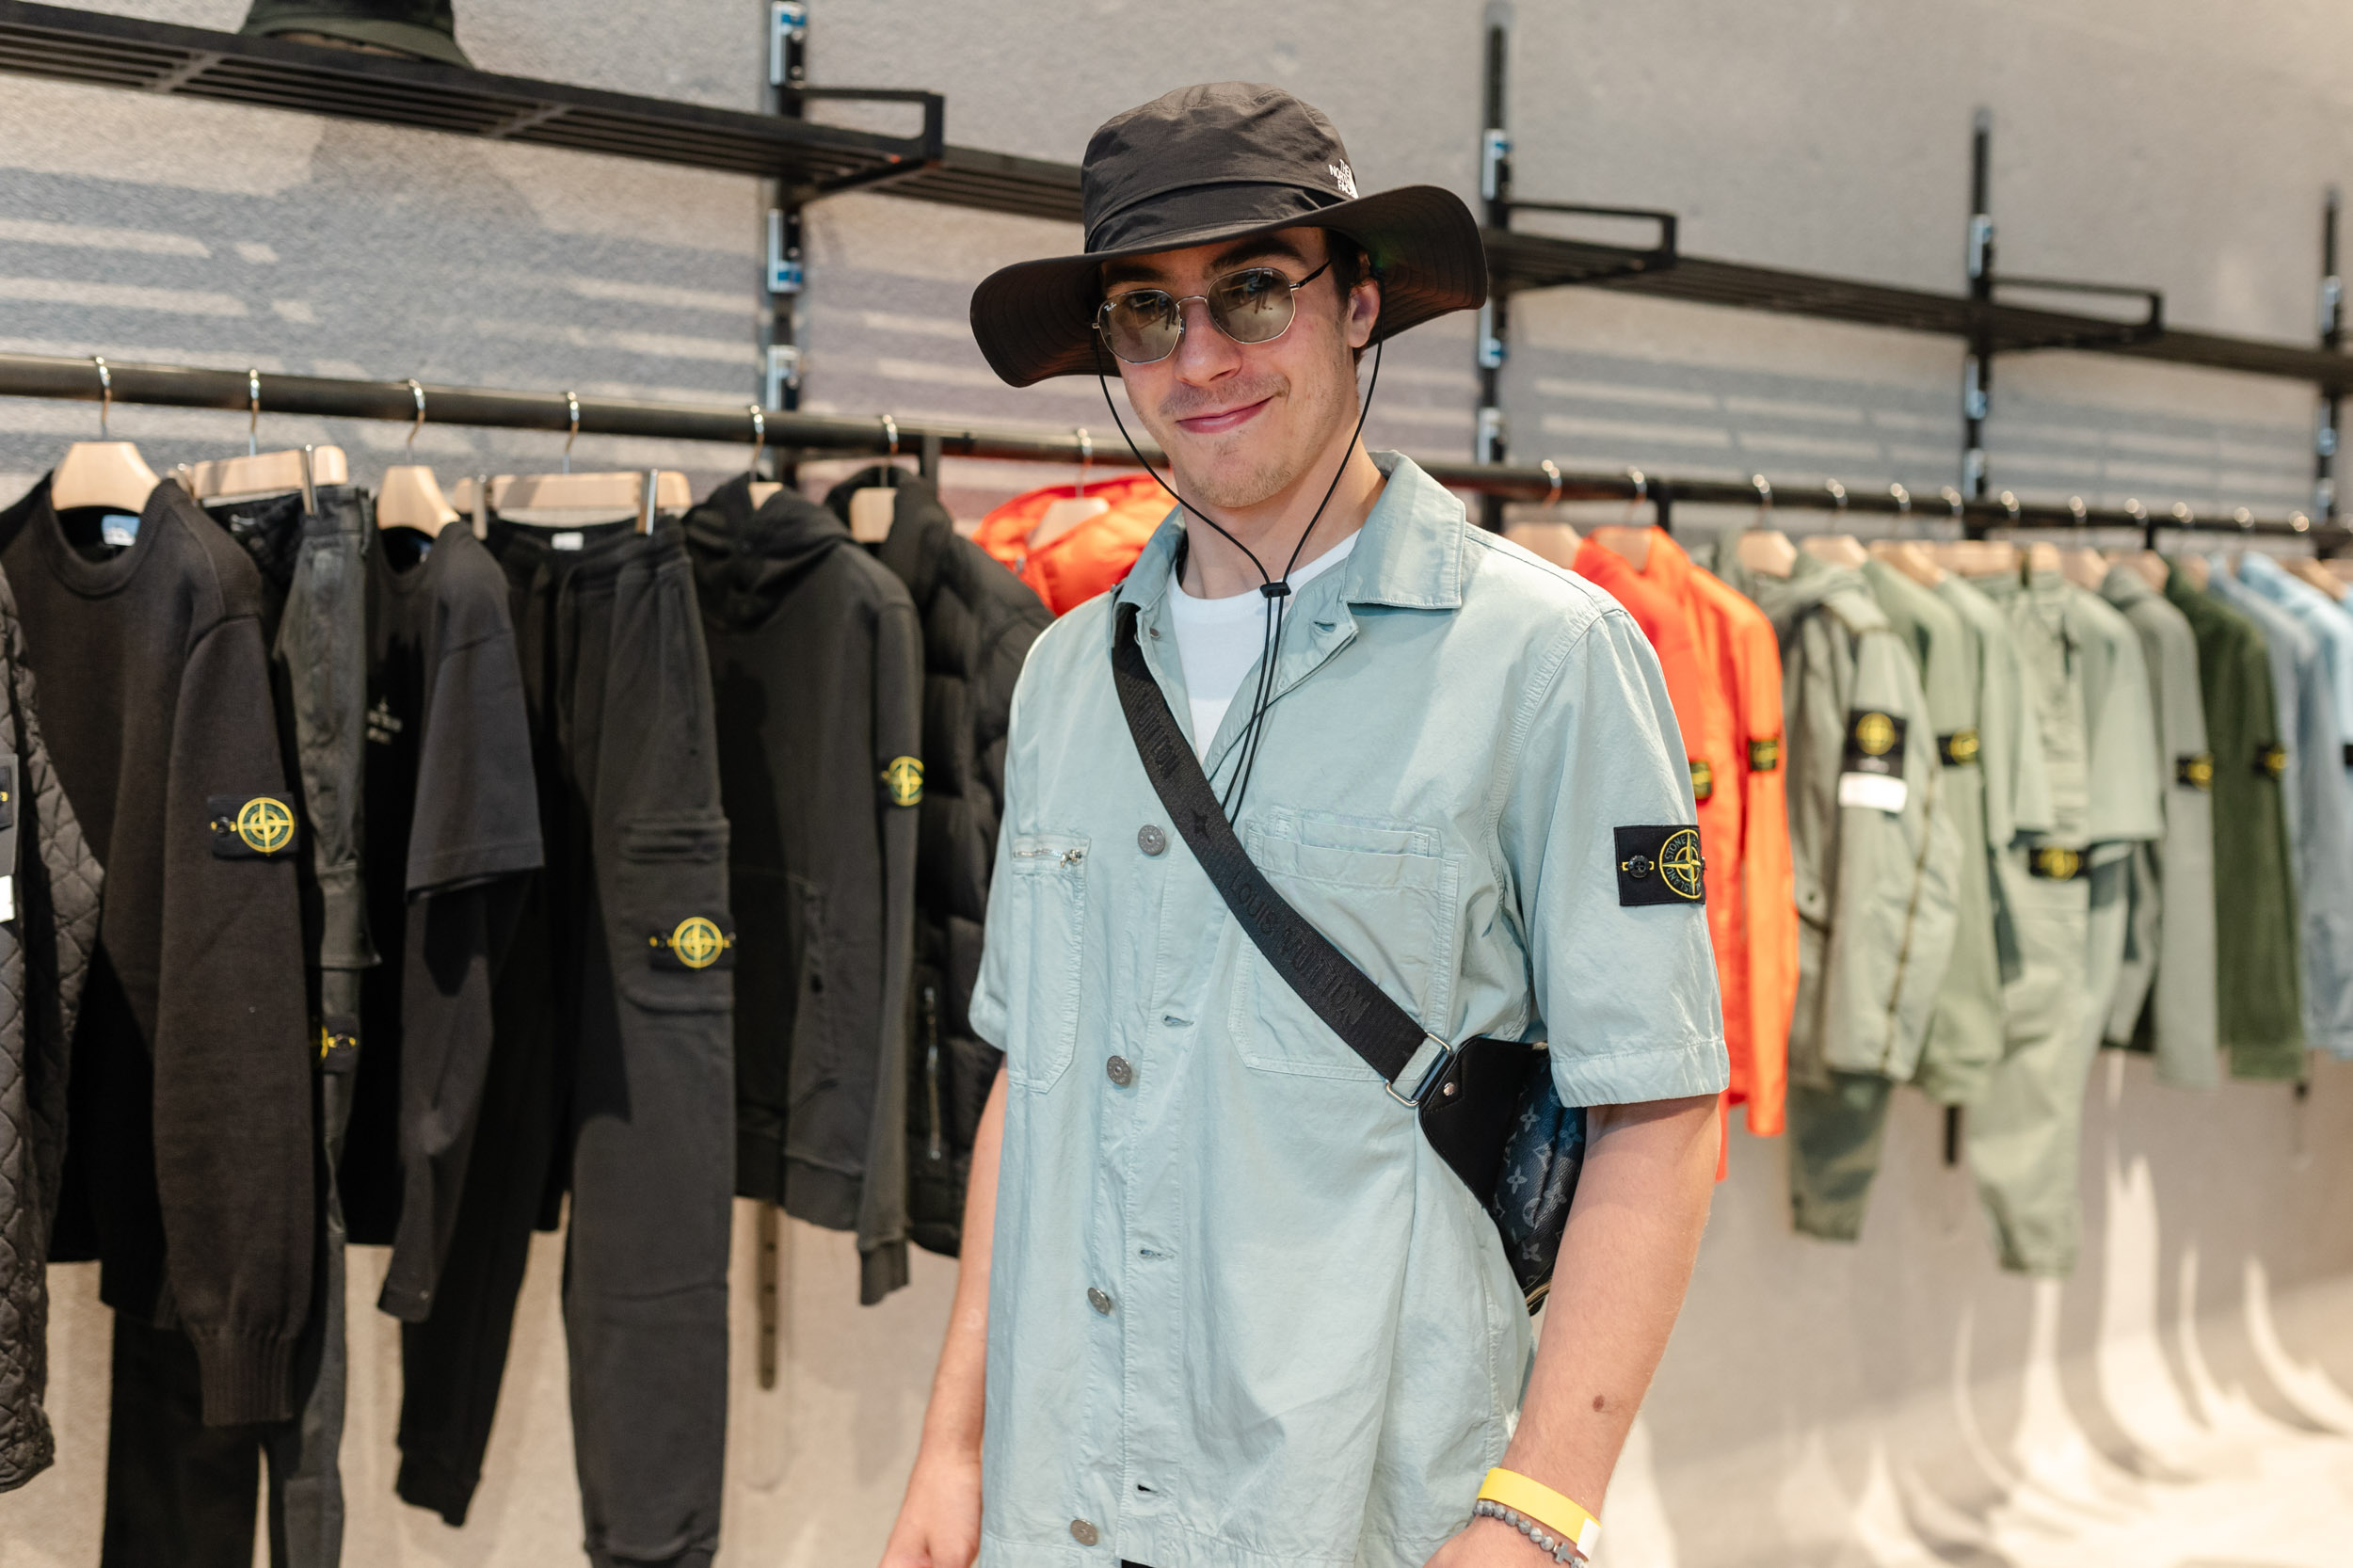 A man wearing a hat standing in front of a rack of clothes.